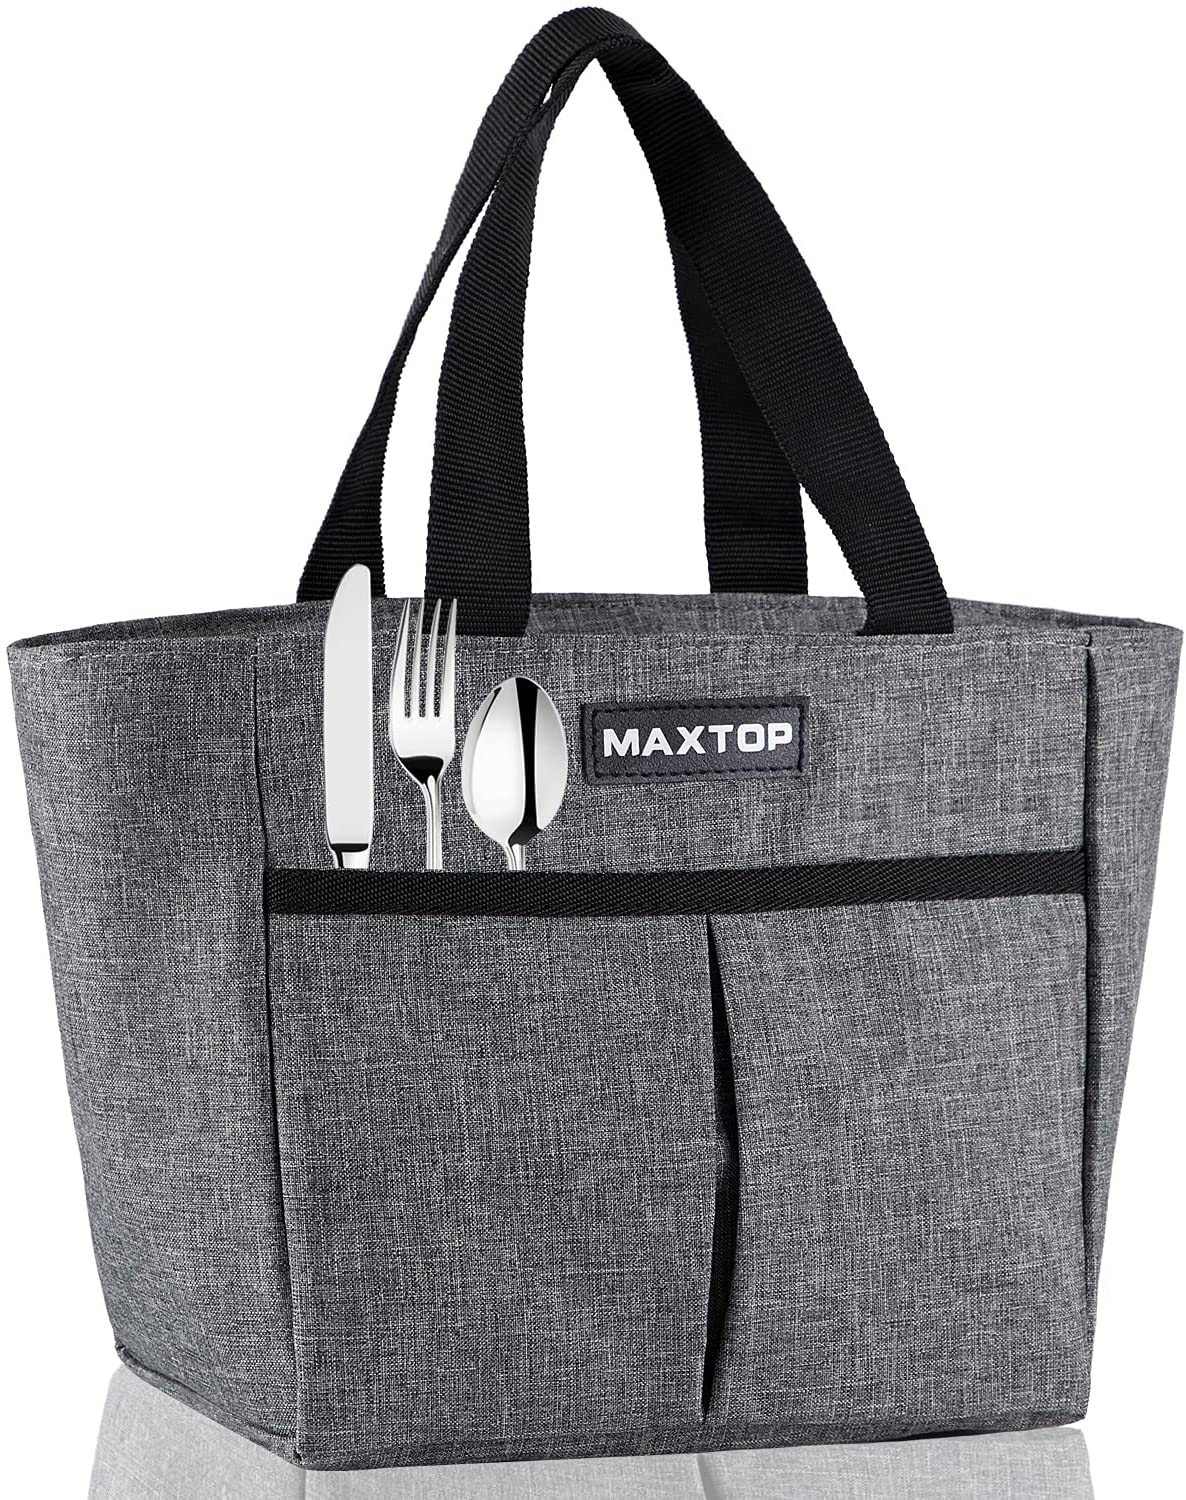 MAXTOP Thermal Insulated Lunch Bag